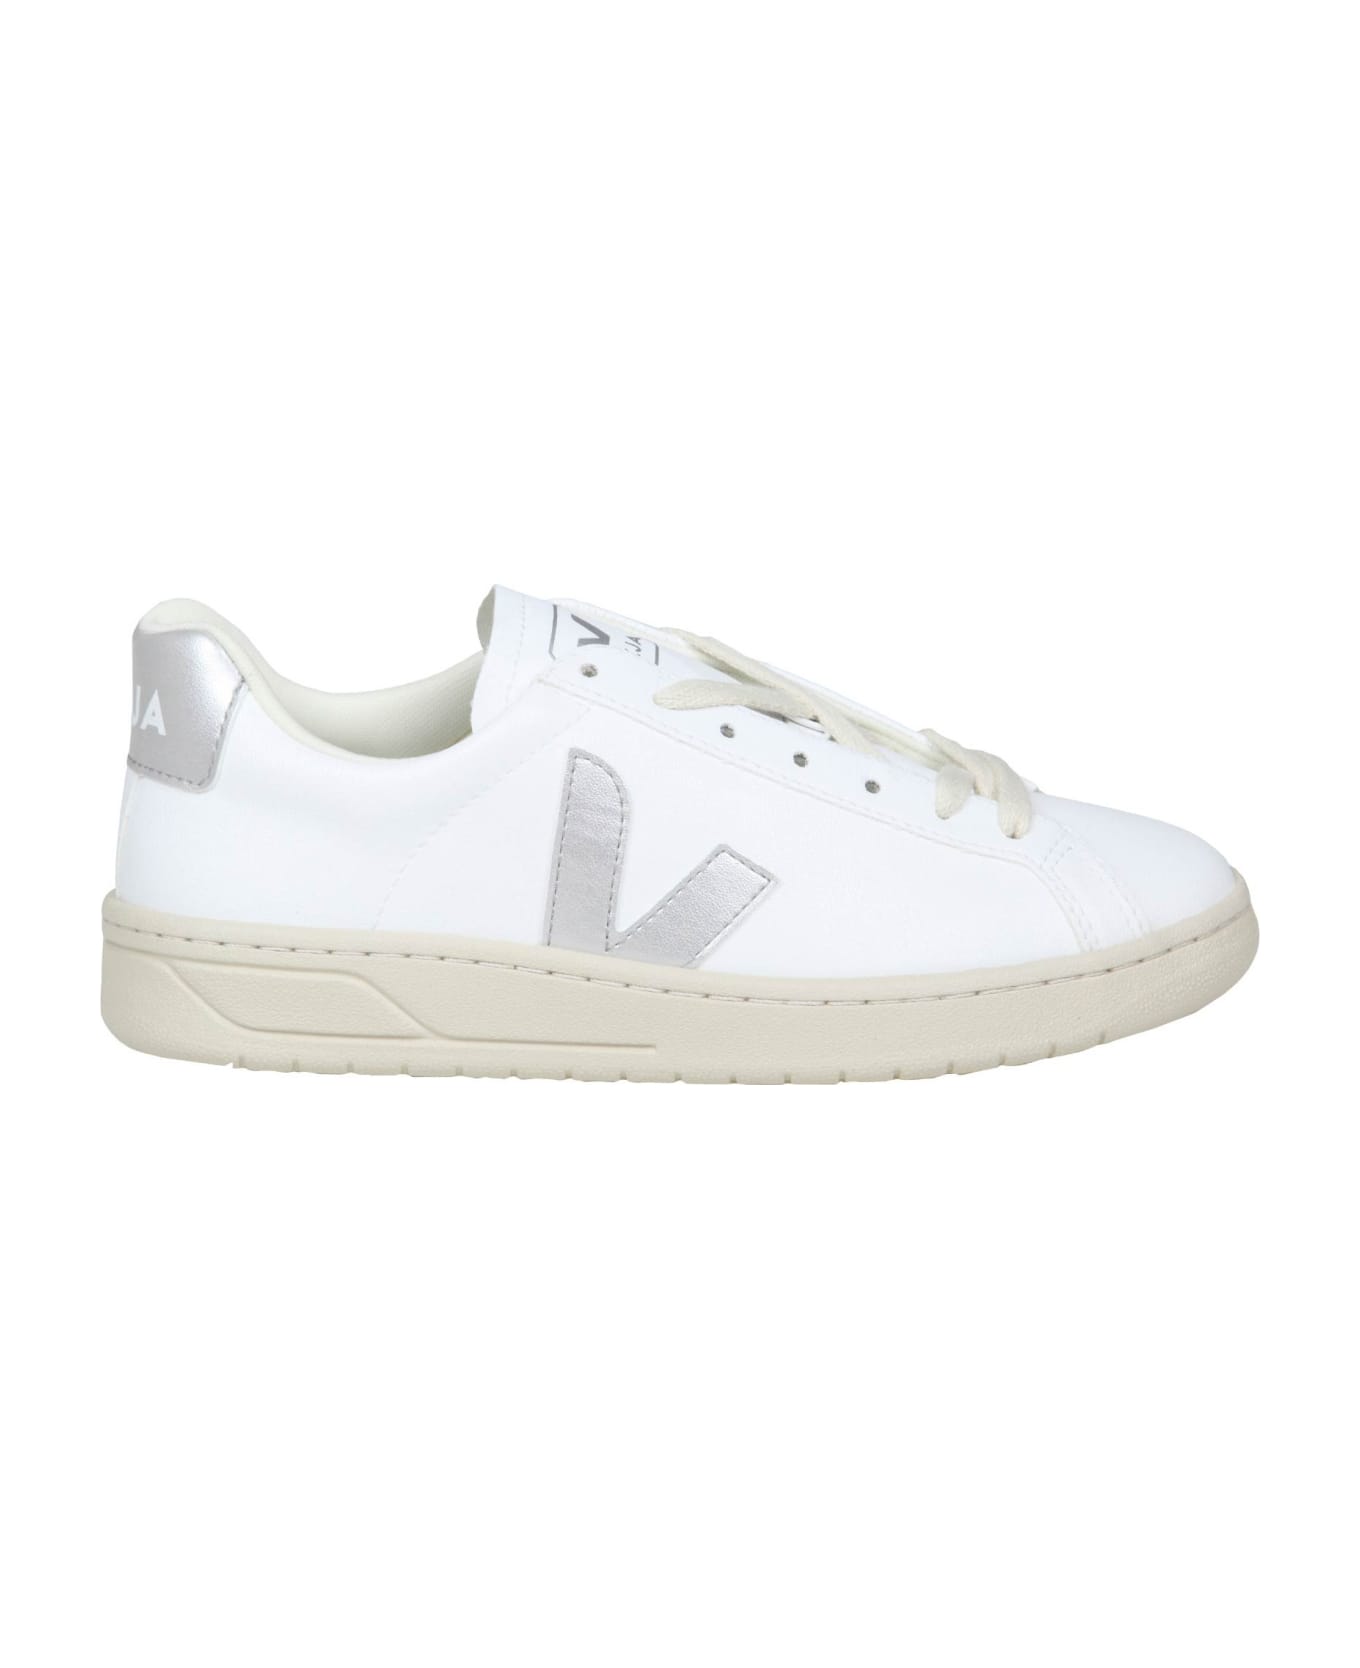 Veja Urca Sneakers In White And Silver Leather - White/Silver スニーカー